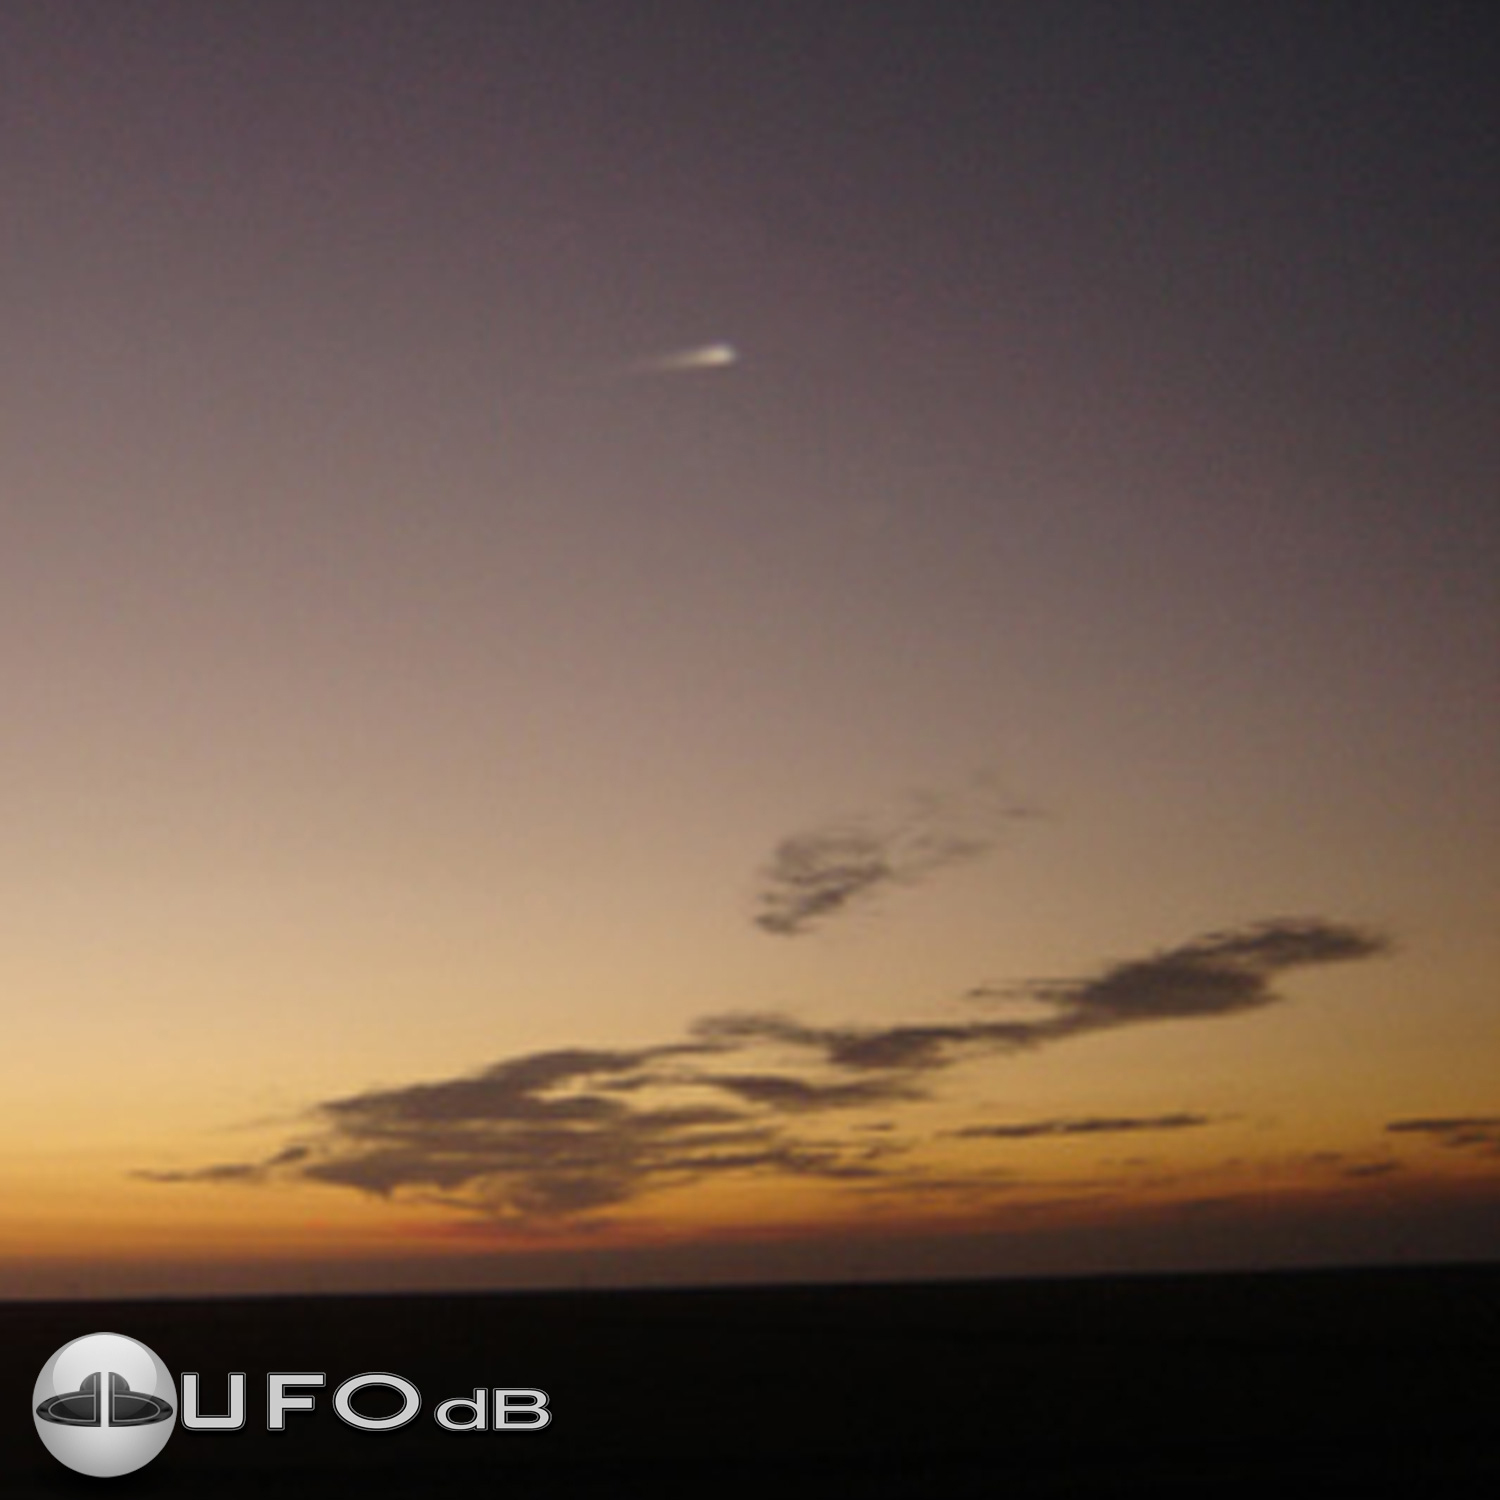 UFO flying over Uruguay in South America at night fall in 2008 UFO Picture #31-1